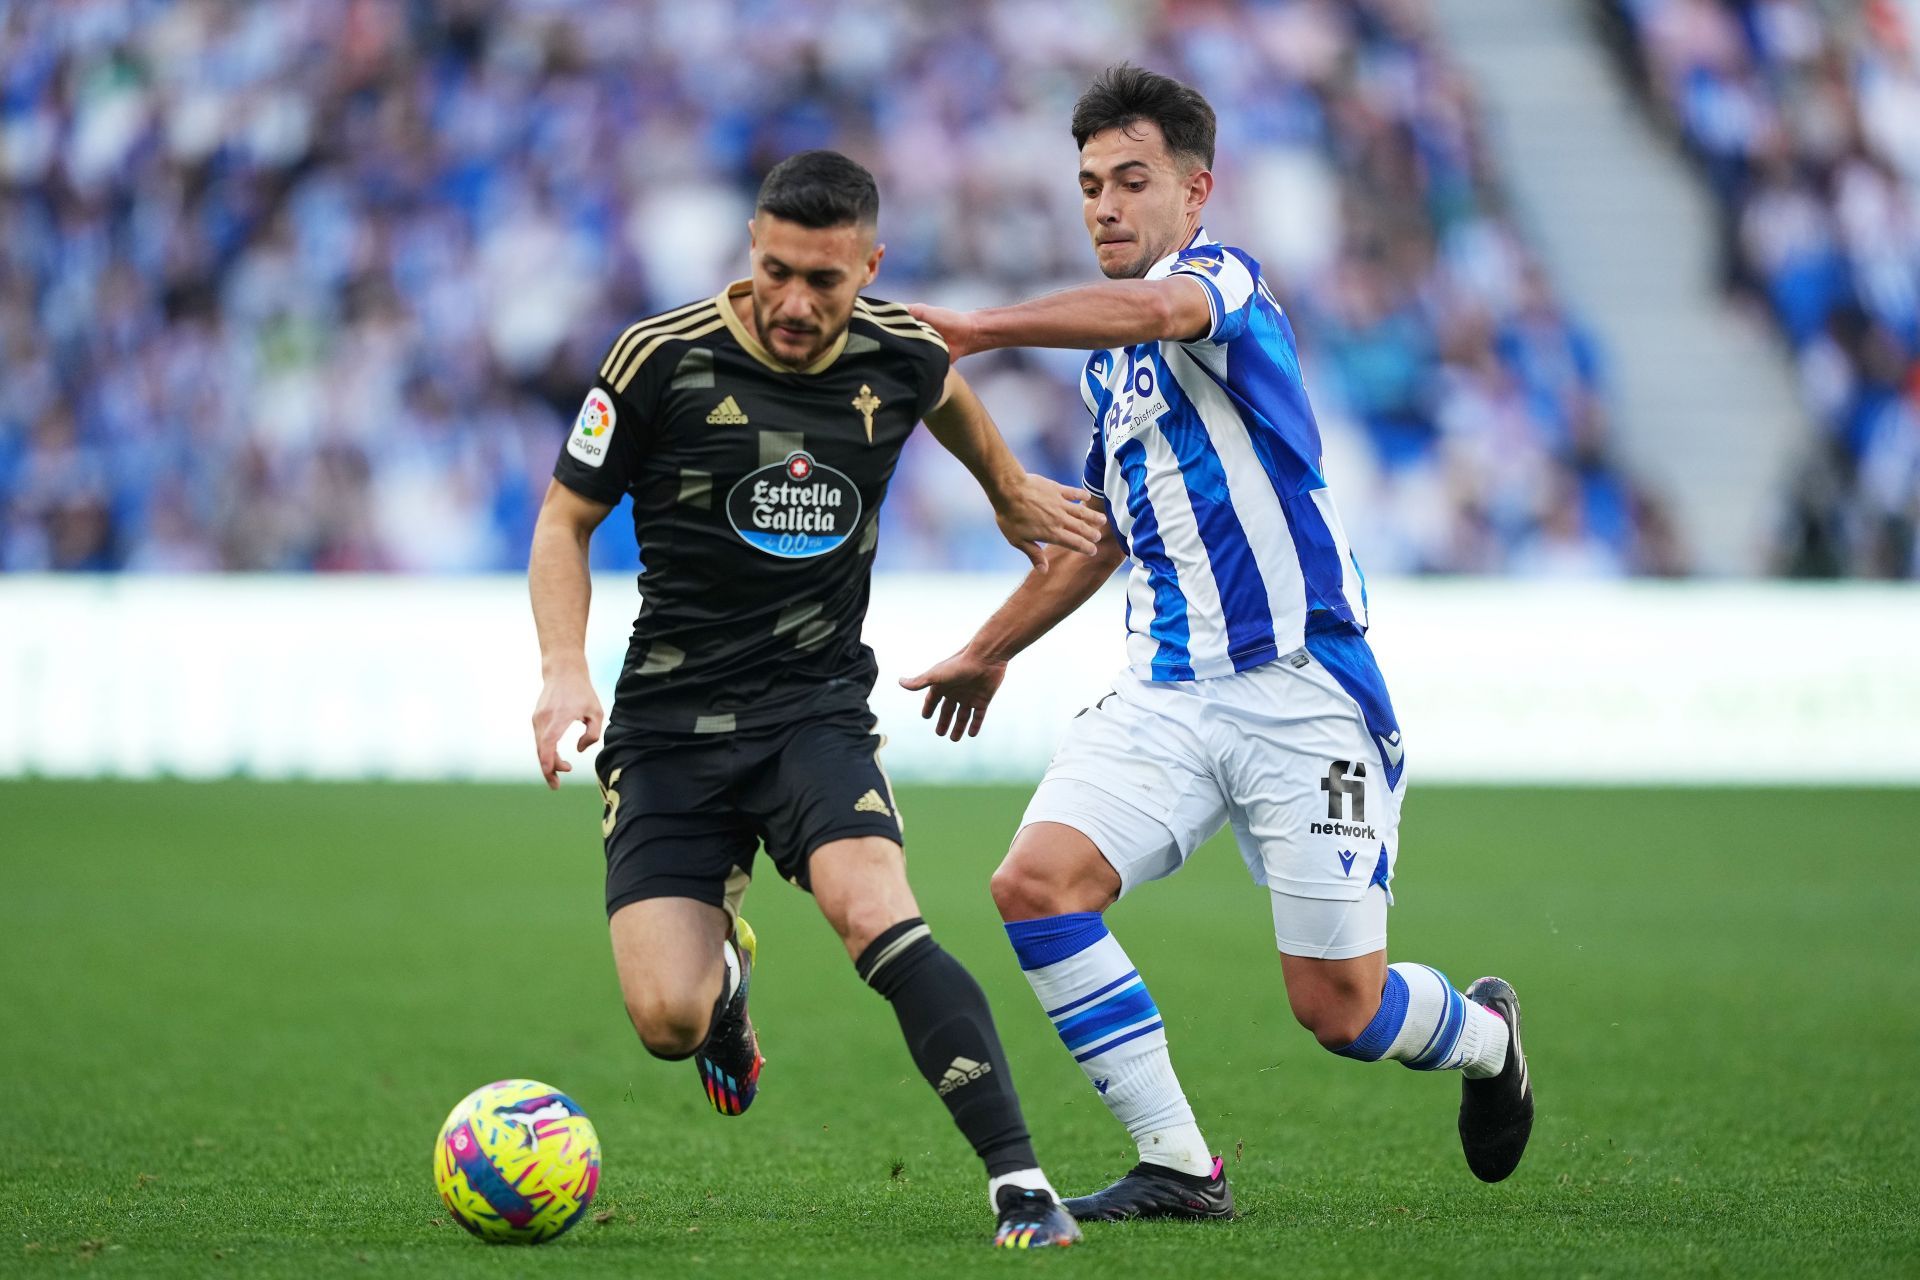 Martin Zubimendi is expected to remain at Real Sociedad.